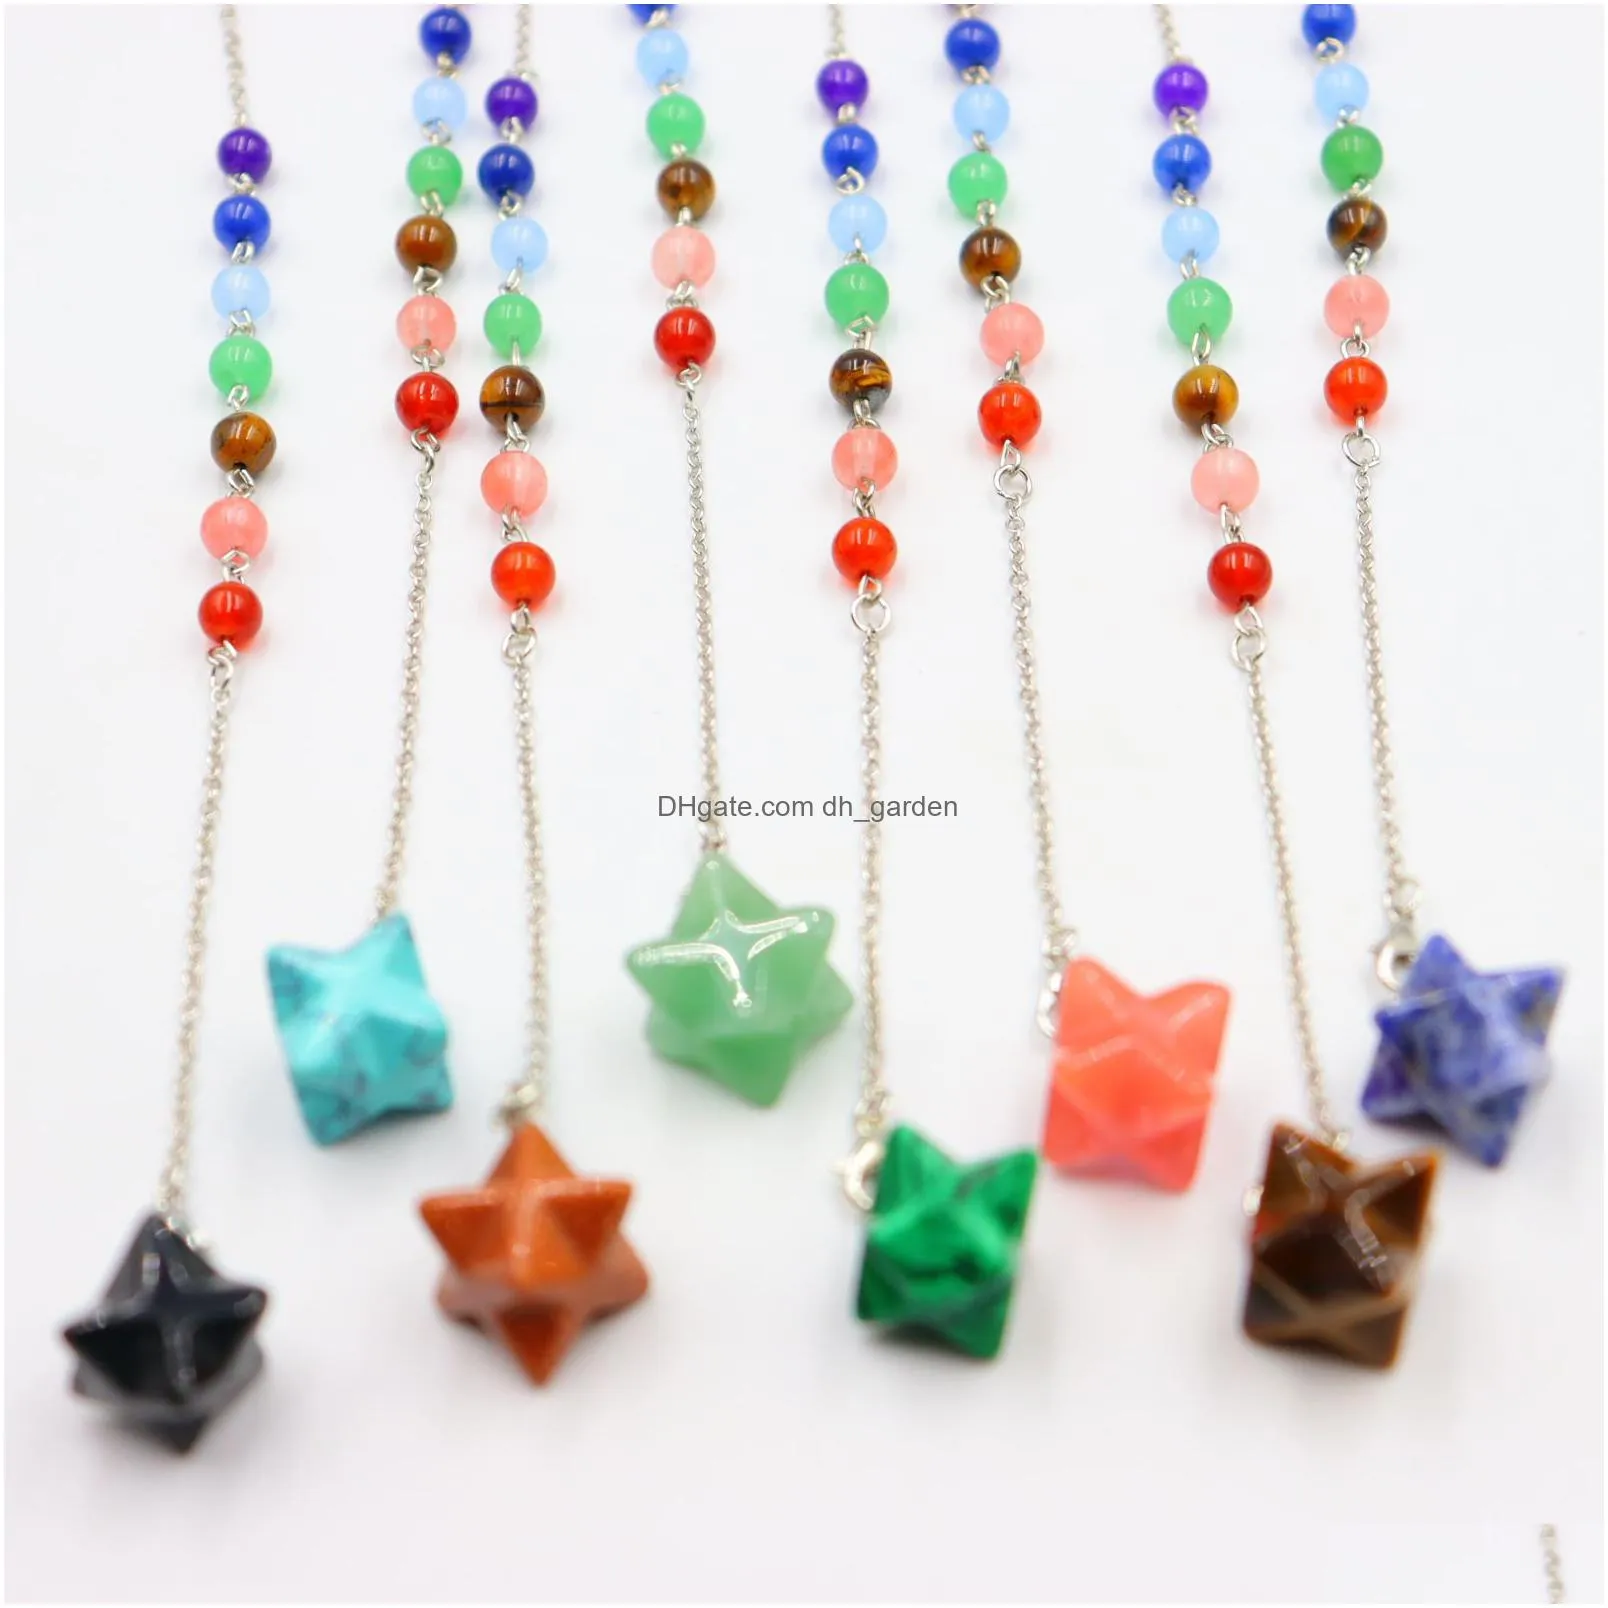 natural stone merkabah star charms pendulum 7 color chakra chain for divination crystal jewelry charm amulet healing pendant